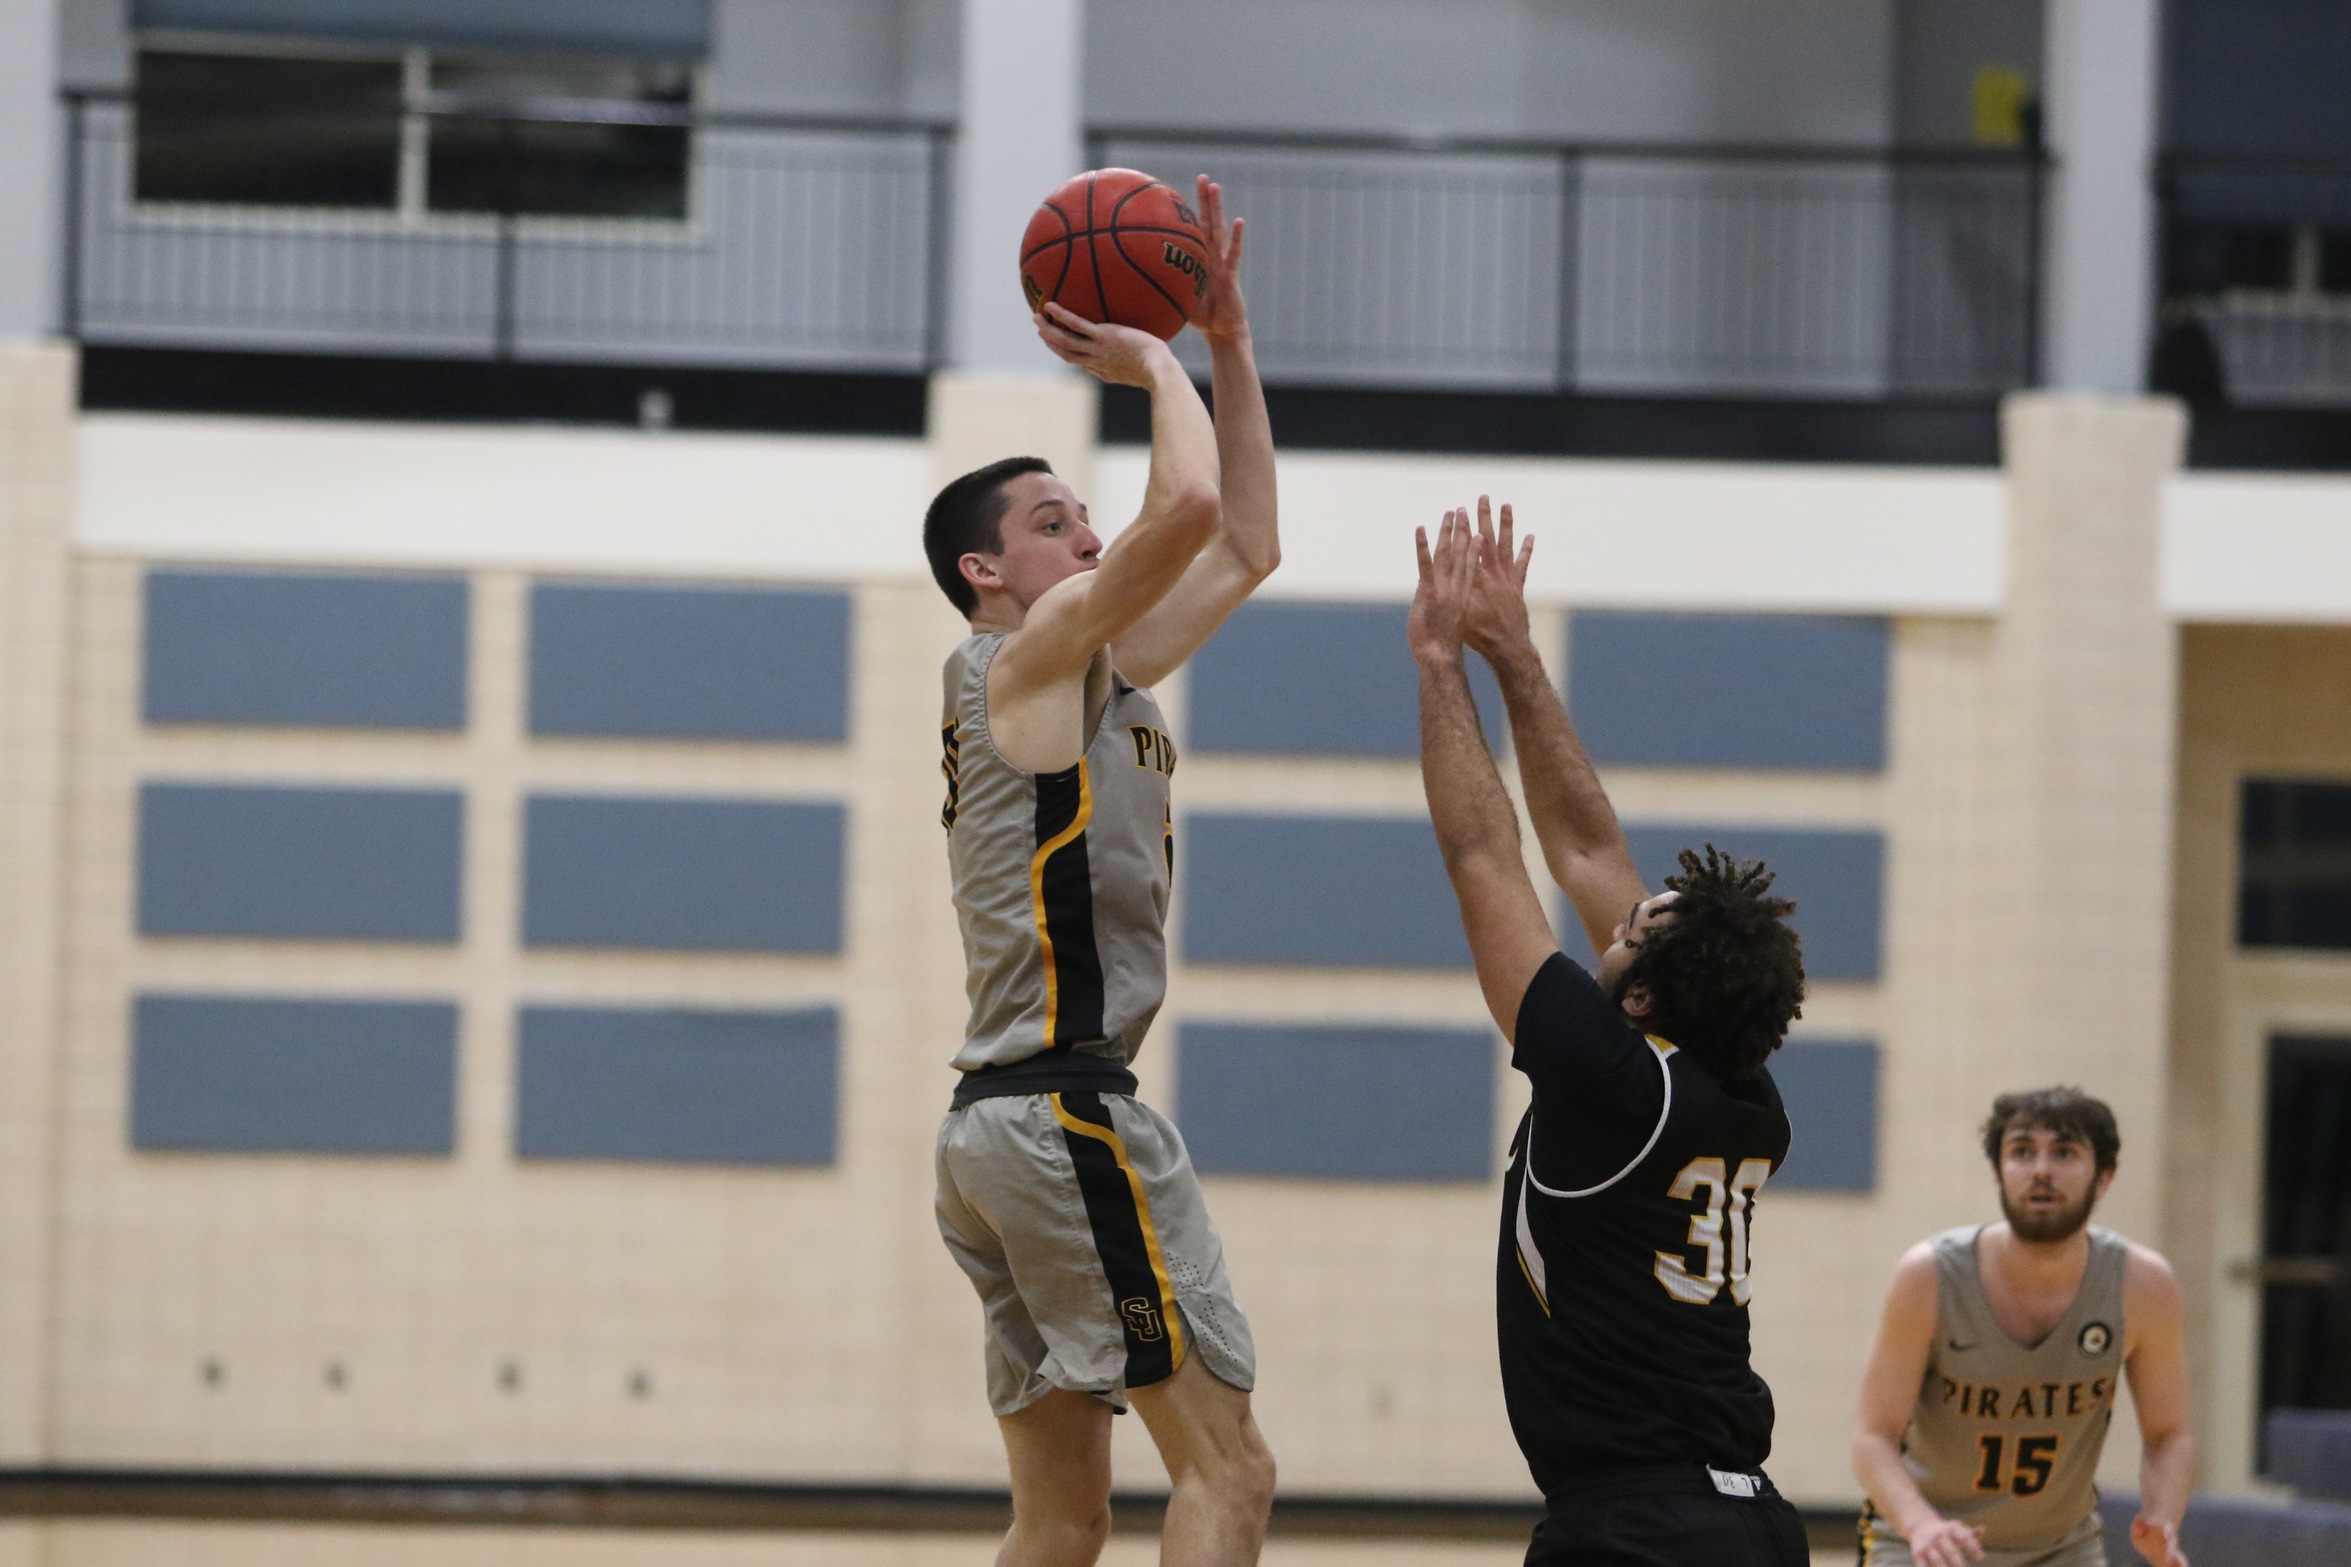 Kyle Poerschke Wins Second Consecutive SCAC Player of the Week